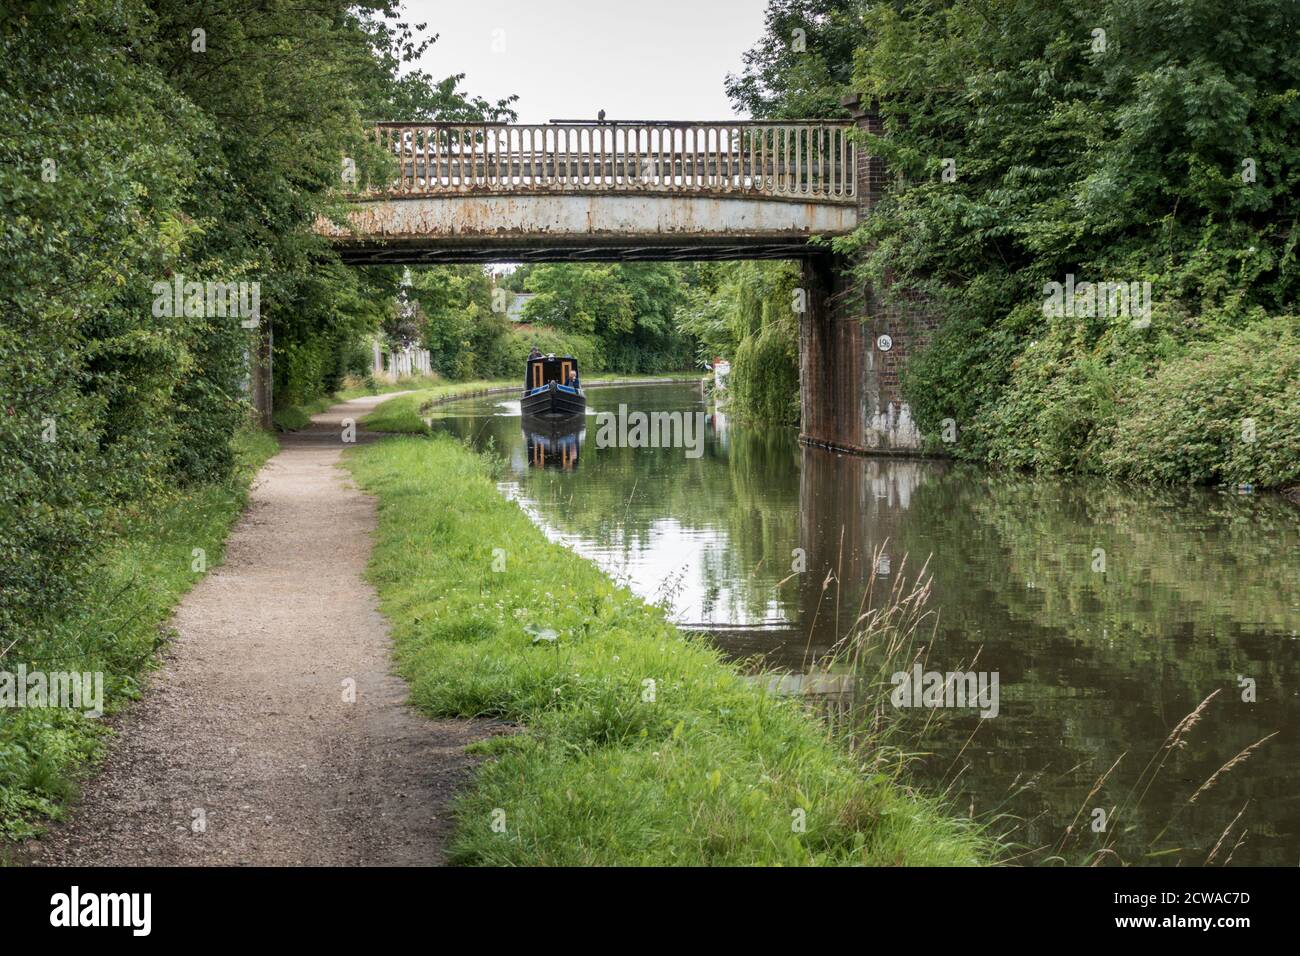 narrowboat on the Coventry Canal in Nuneaton, sailing towards railway bridge carrying the line between Nuneaton and Coventry. Stock Photo